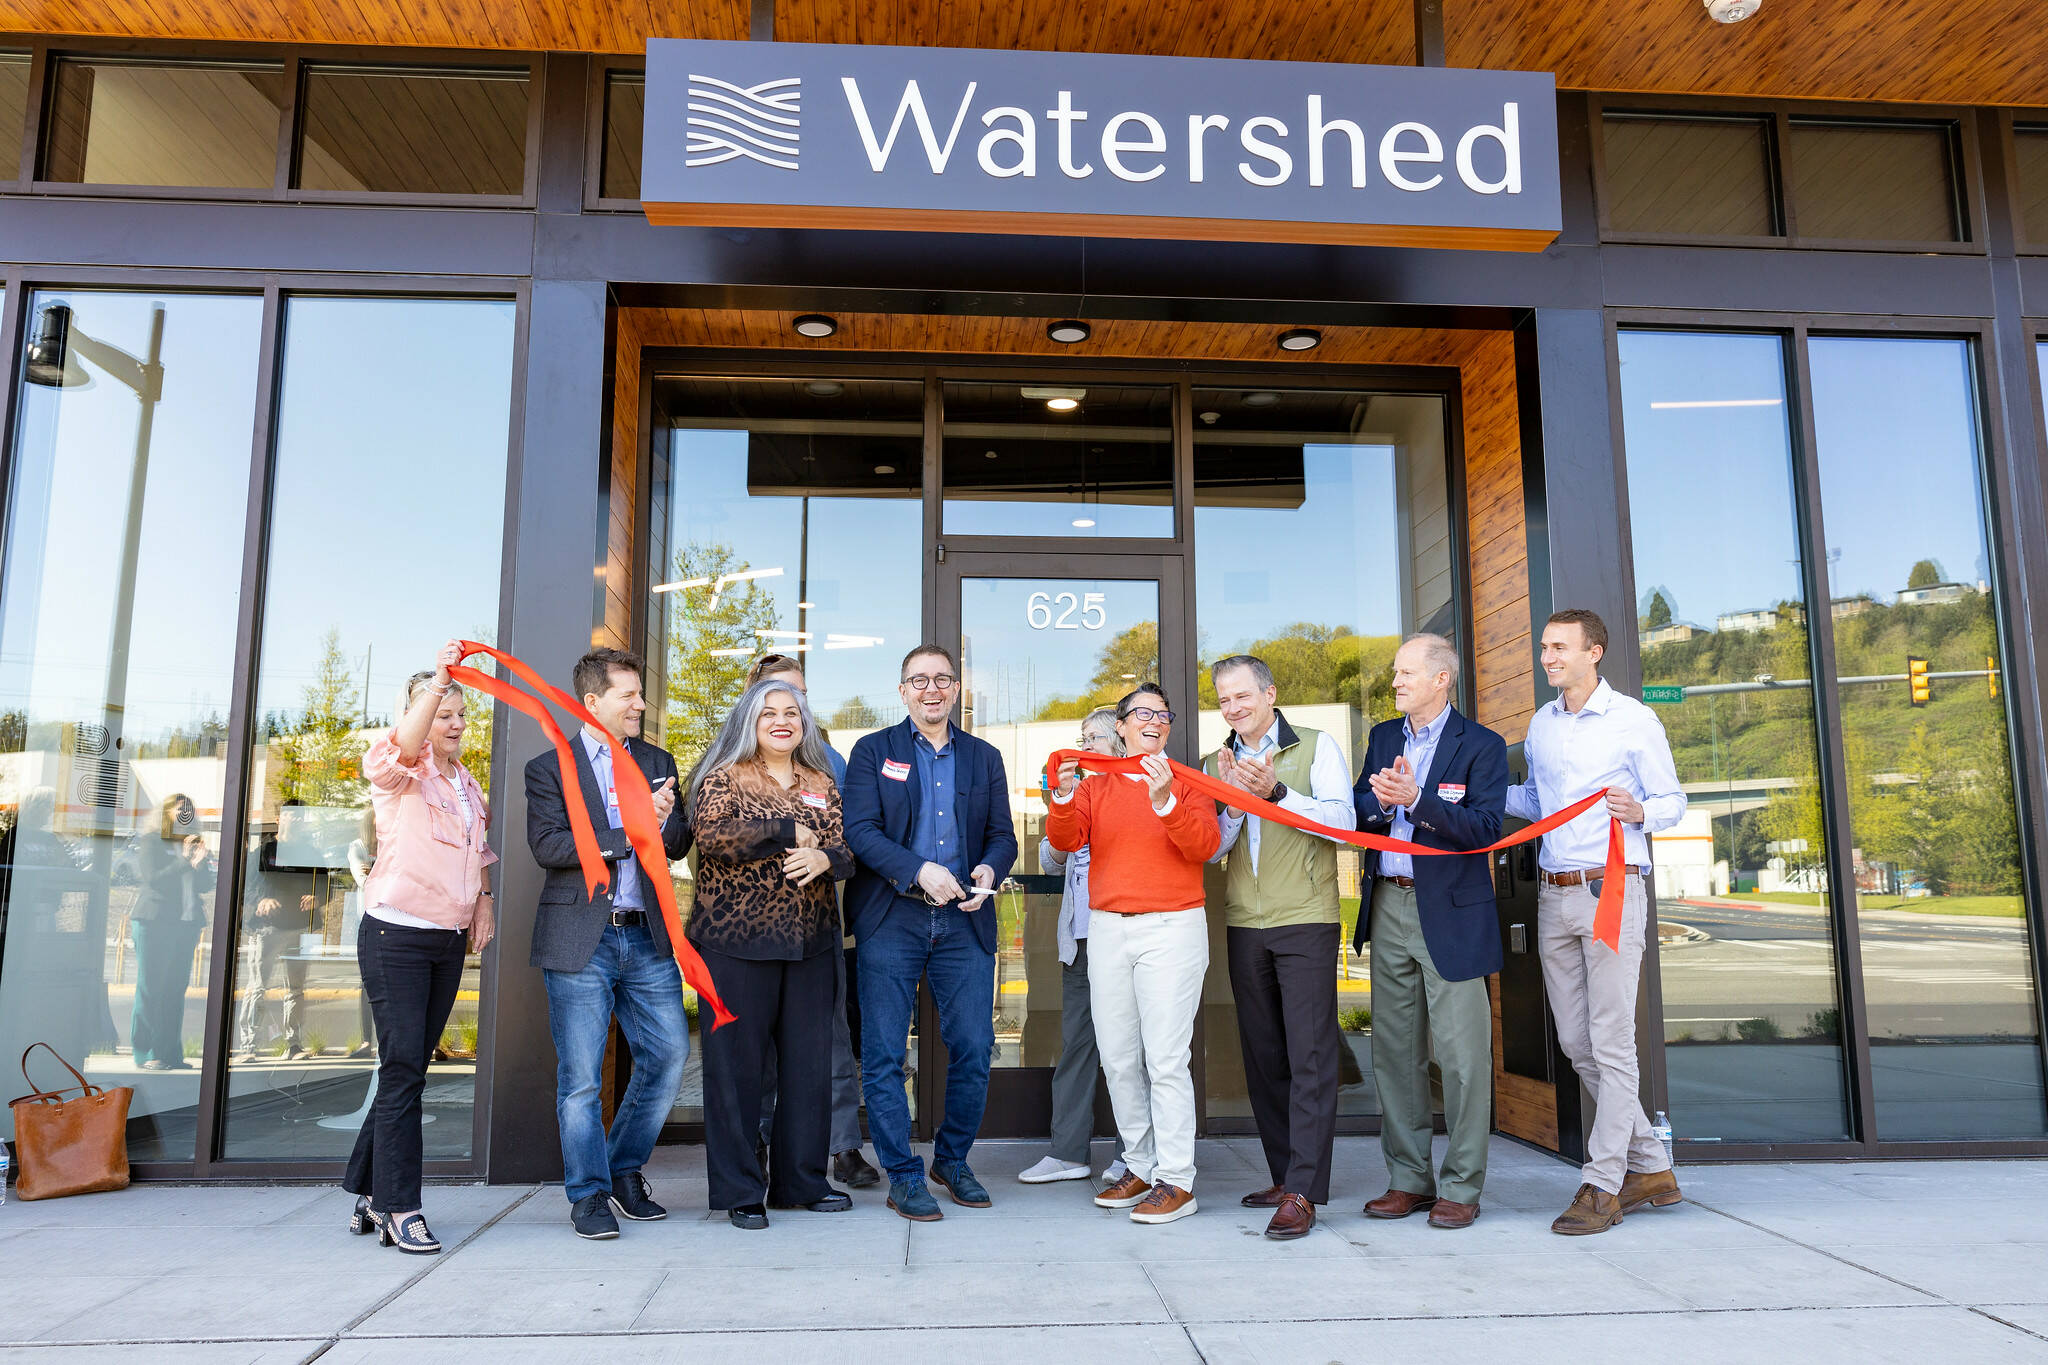 The ribbon-cutting ceremony for the Watershed Apartments took place April 18 with guest speakers and a tour of the facilities, which includes a fitness center, parcel room, rooftop lounge area and more. Courtesy image